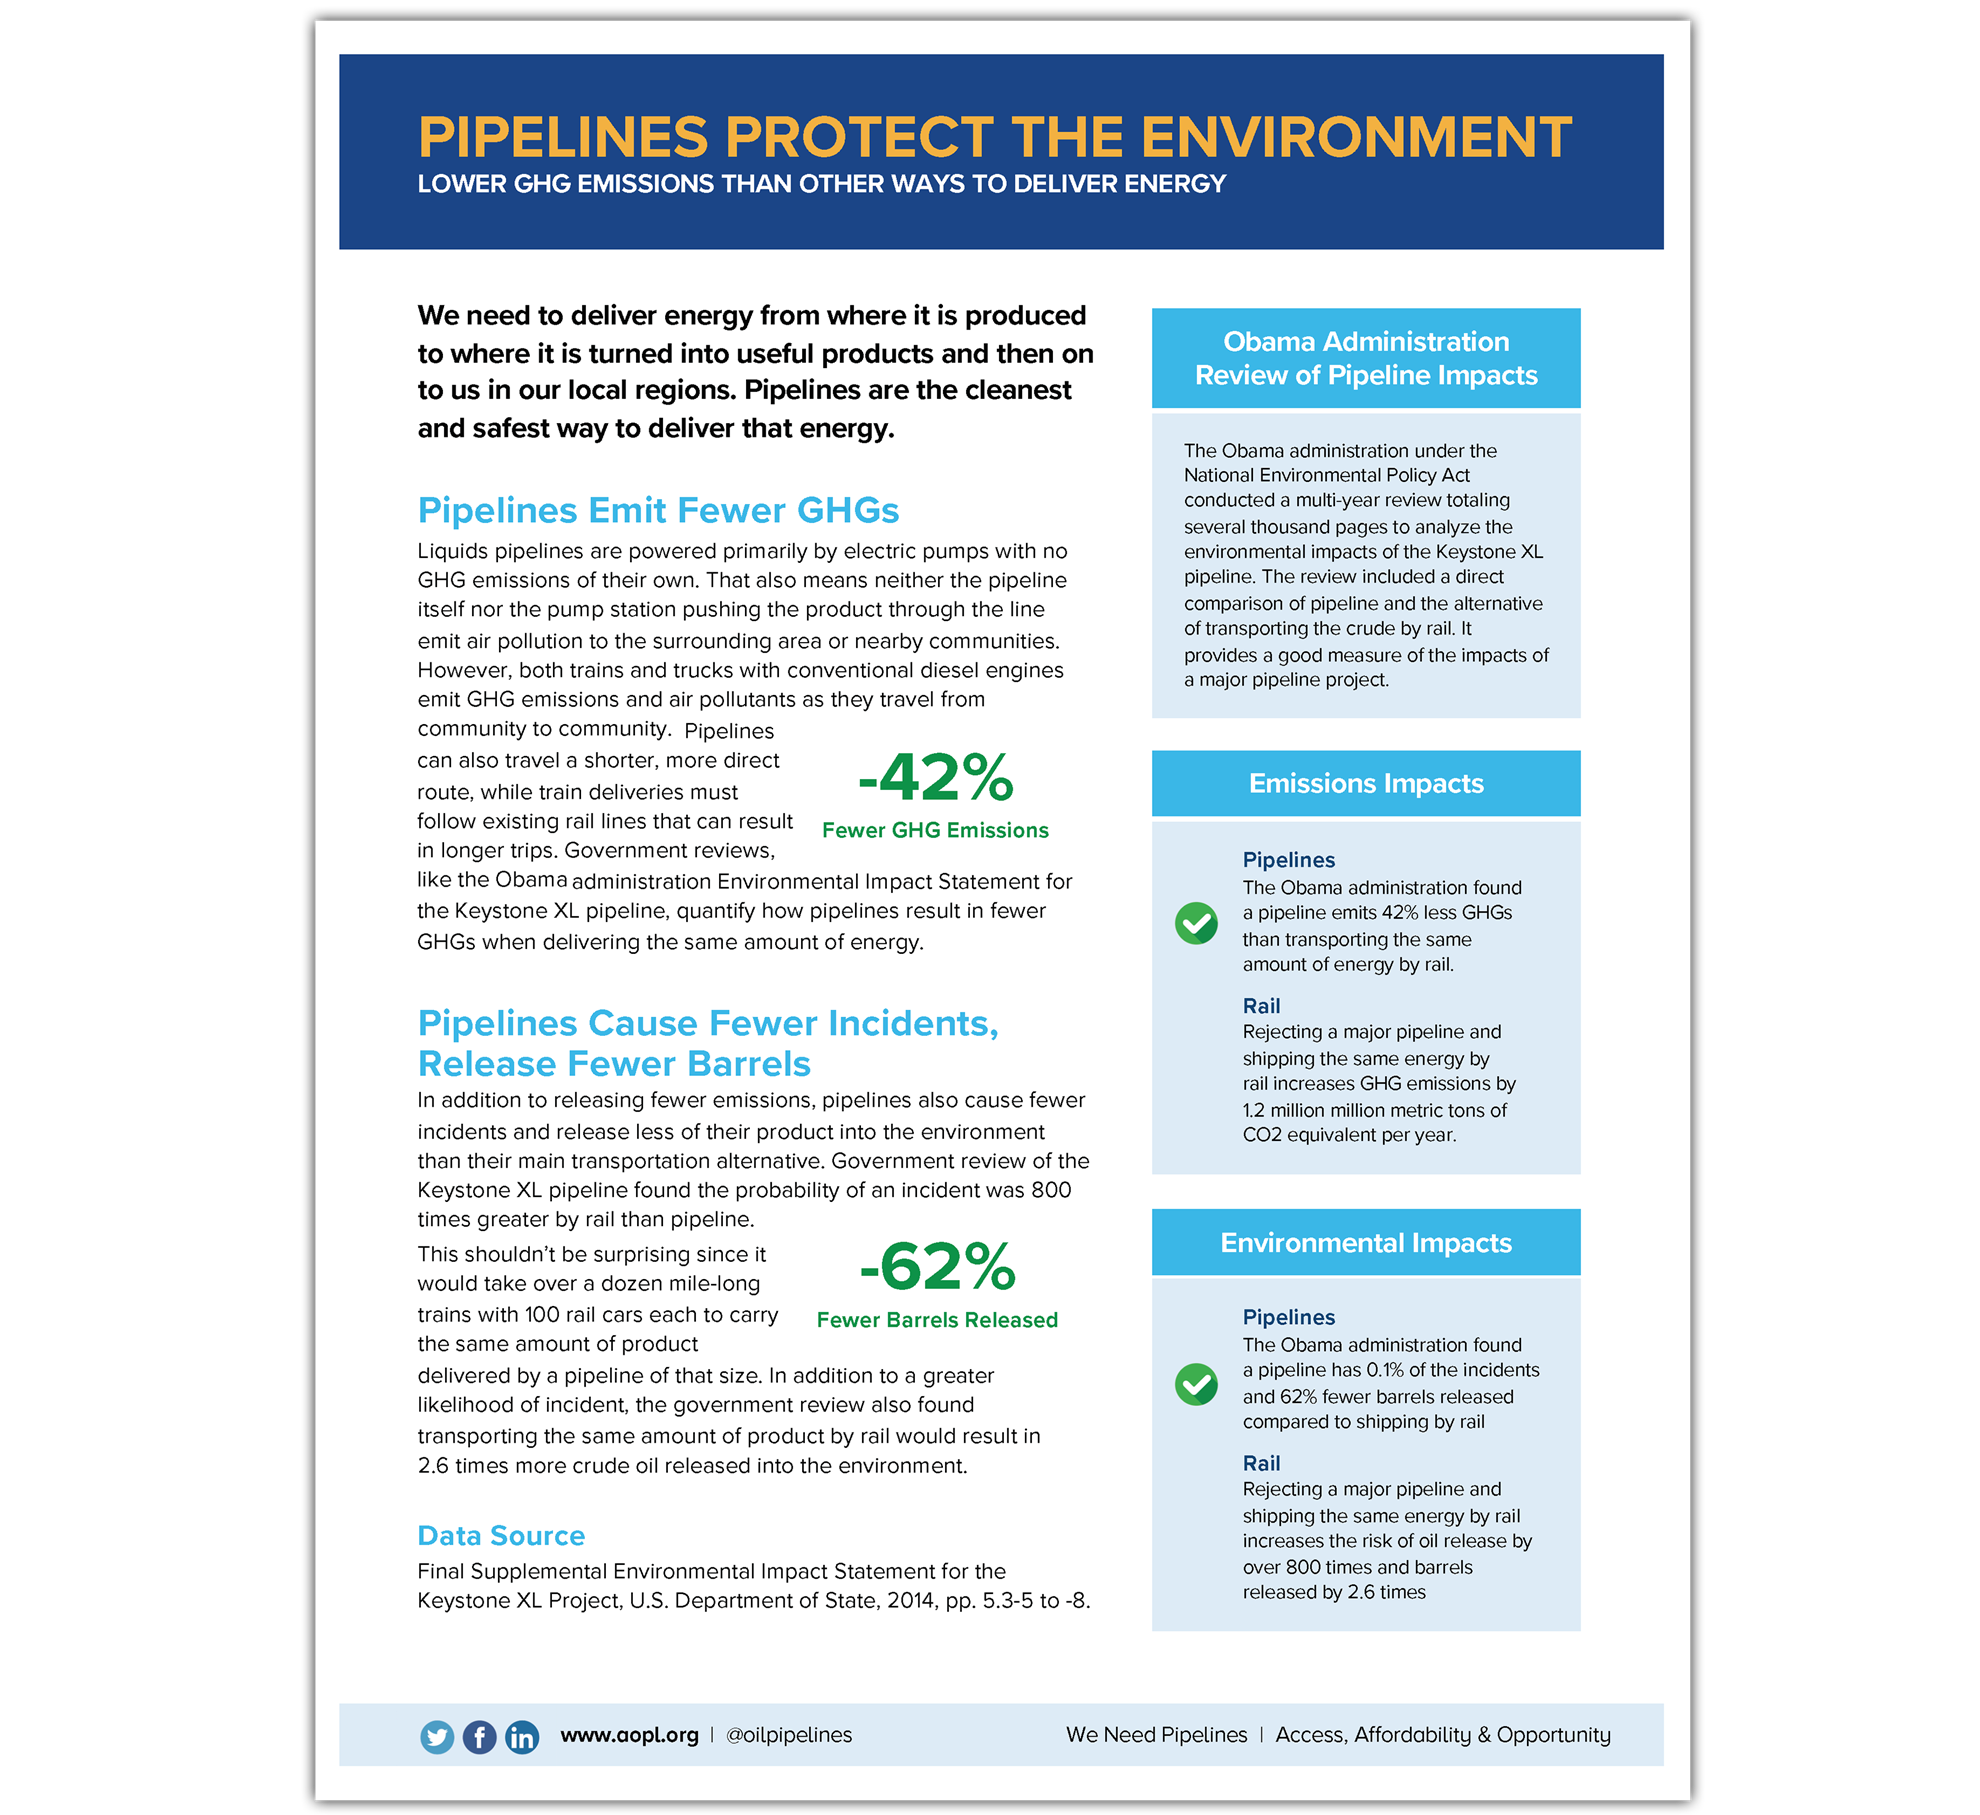 Pipelines Protect the Environment